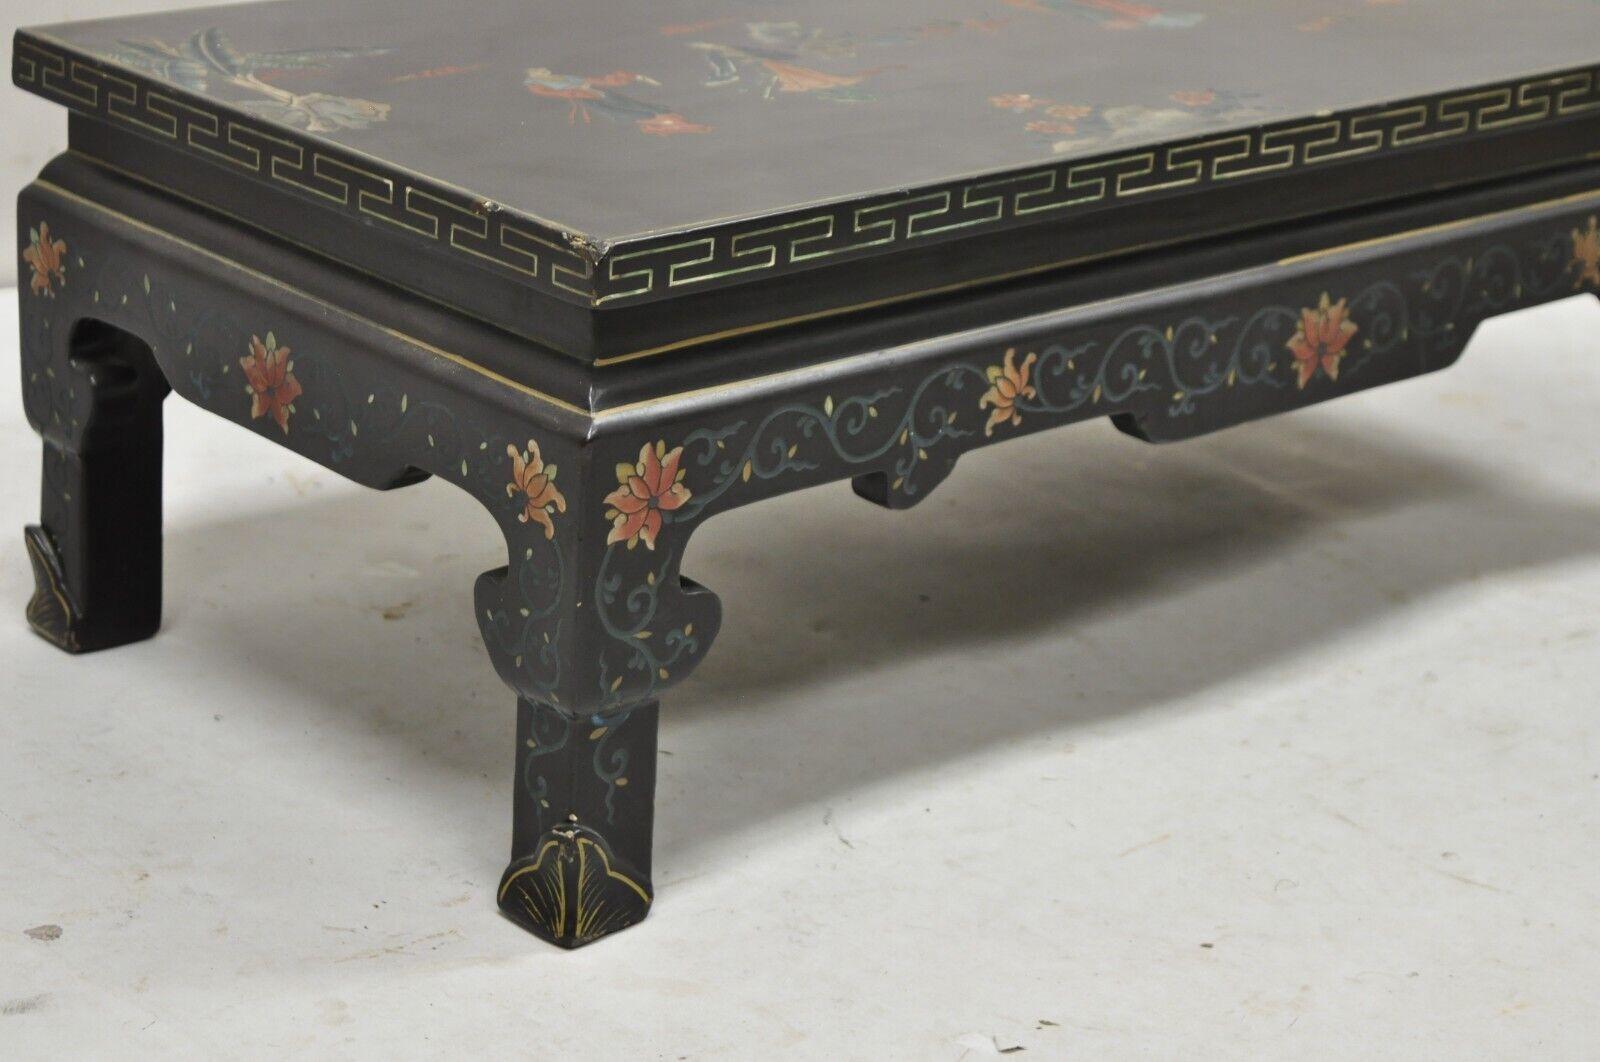 Vintage Chinese Oriental Black Lacquer Hand Painted Low Asian Side Table im Zustand „Gut“ im Angebot in Philadelphia, PA